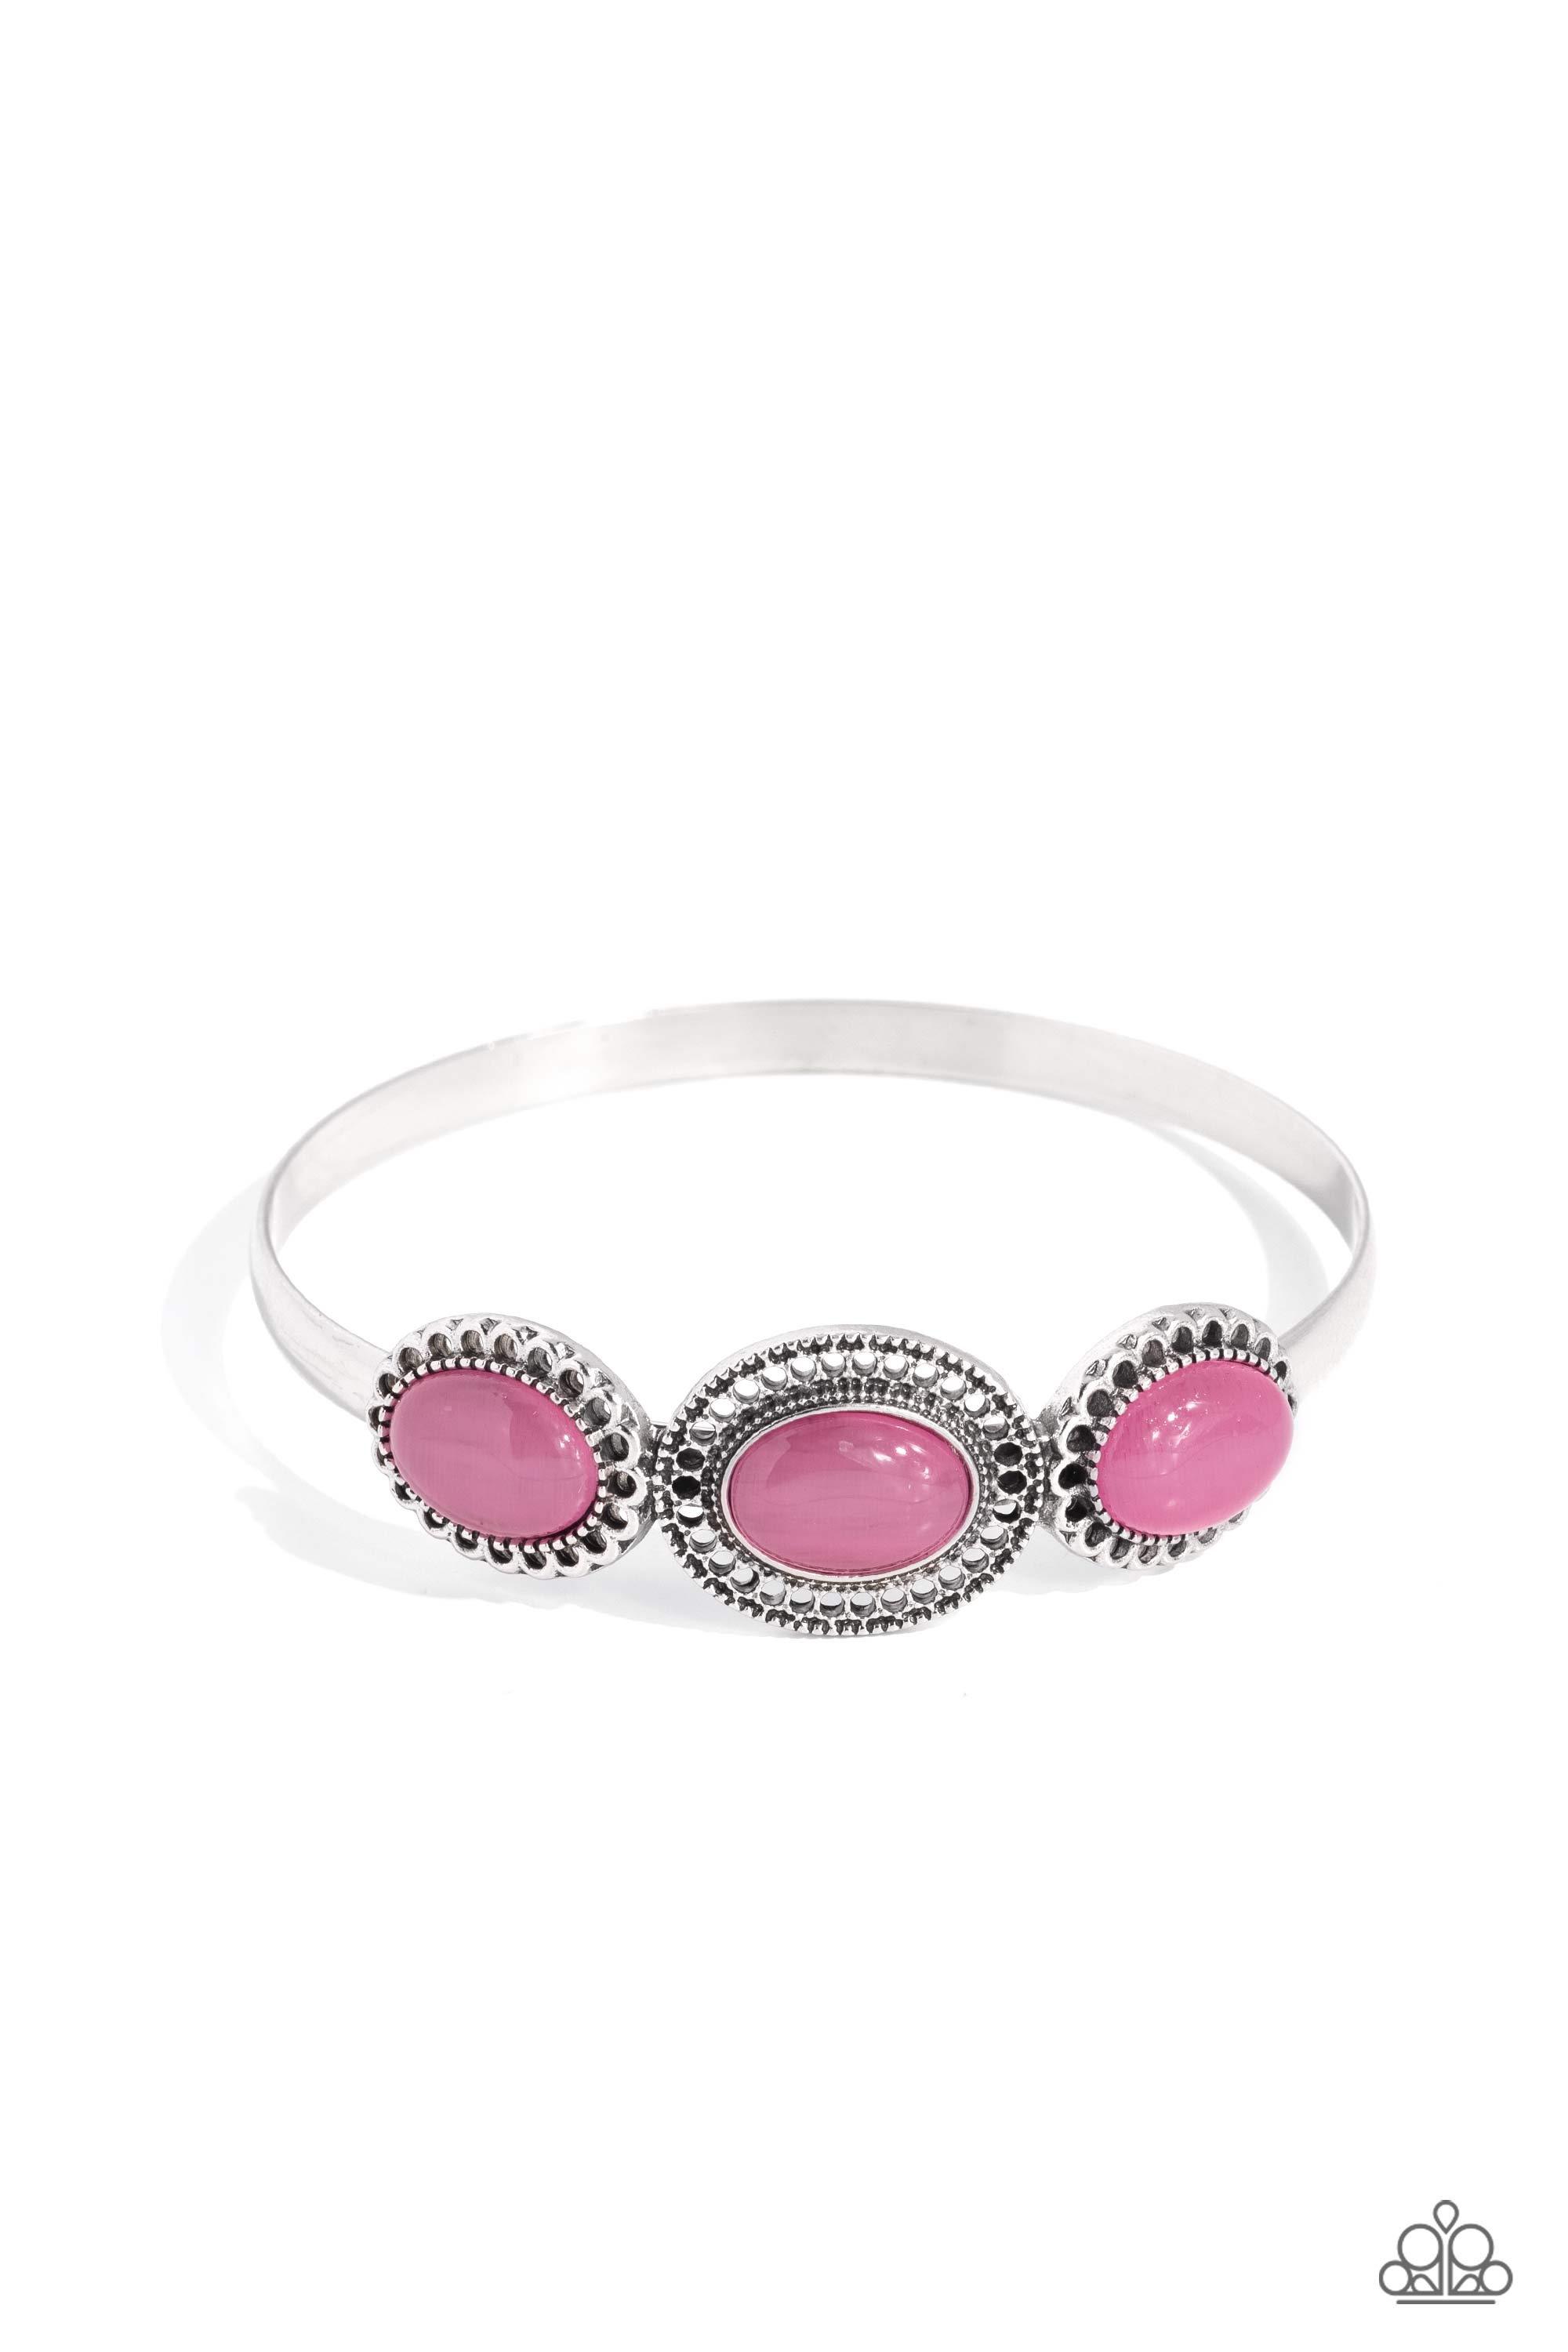 Paparazzi Bracelet - Life of The Party - Big-Hearted Beam - Pink